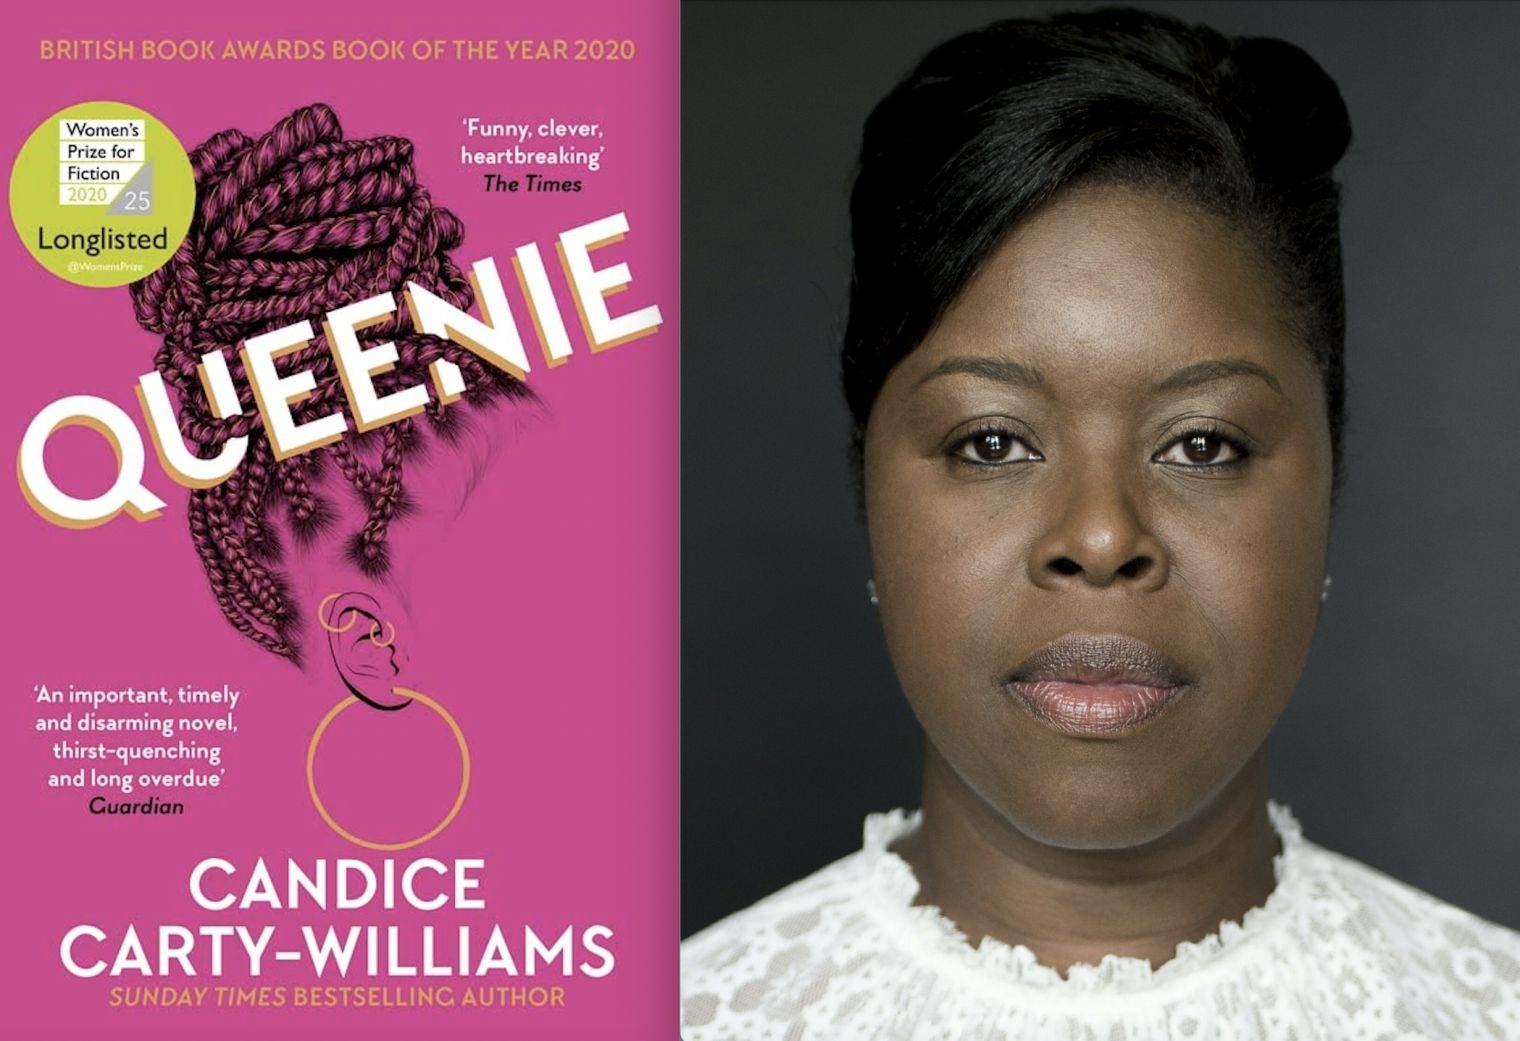 Michelle Greenidge will play Aunty Maggie in Channel 4’s highly anticipated adaptation of Candice Carty-Williams’s bestselling novel ‘Queenie’